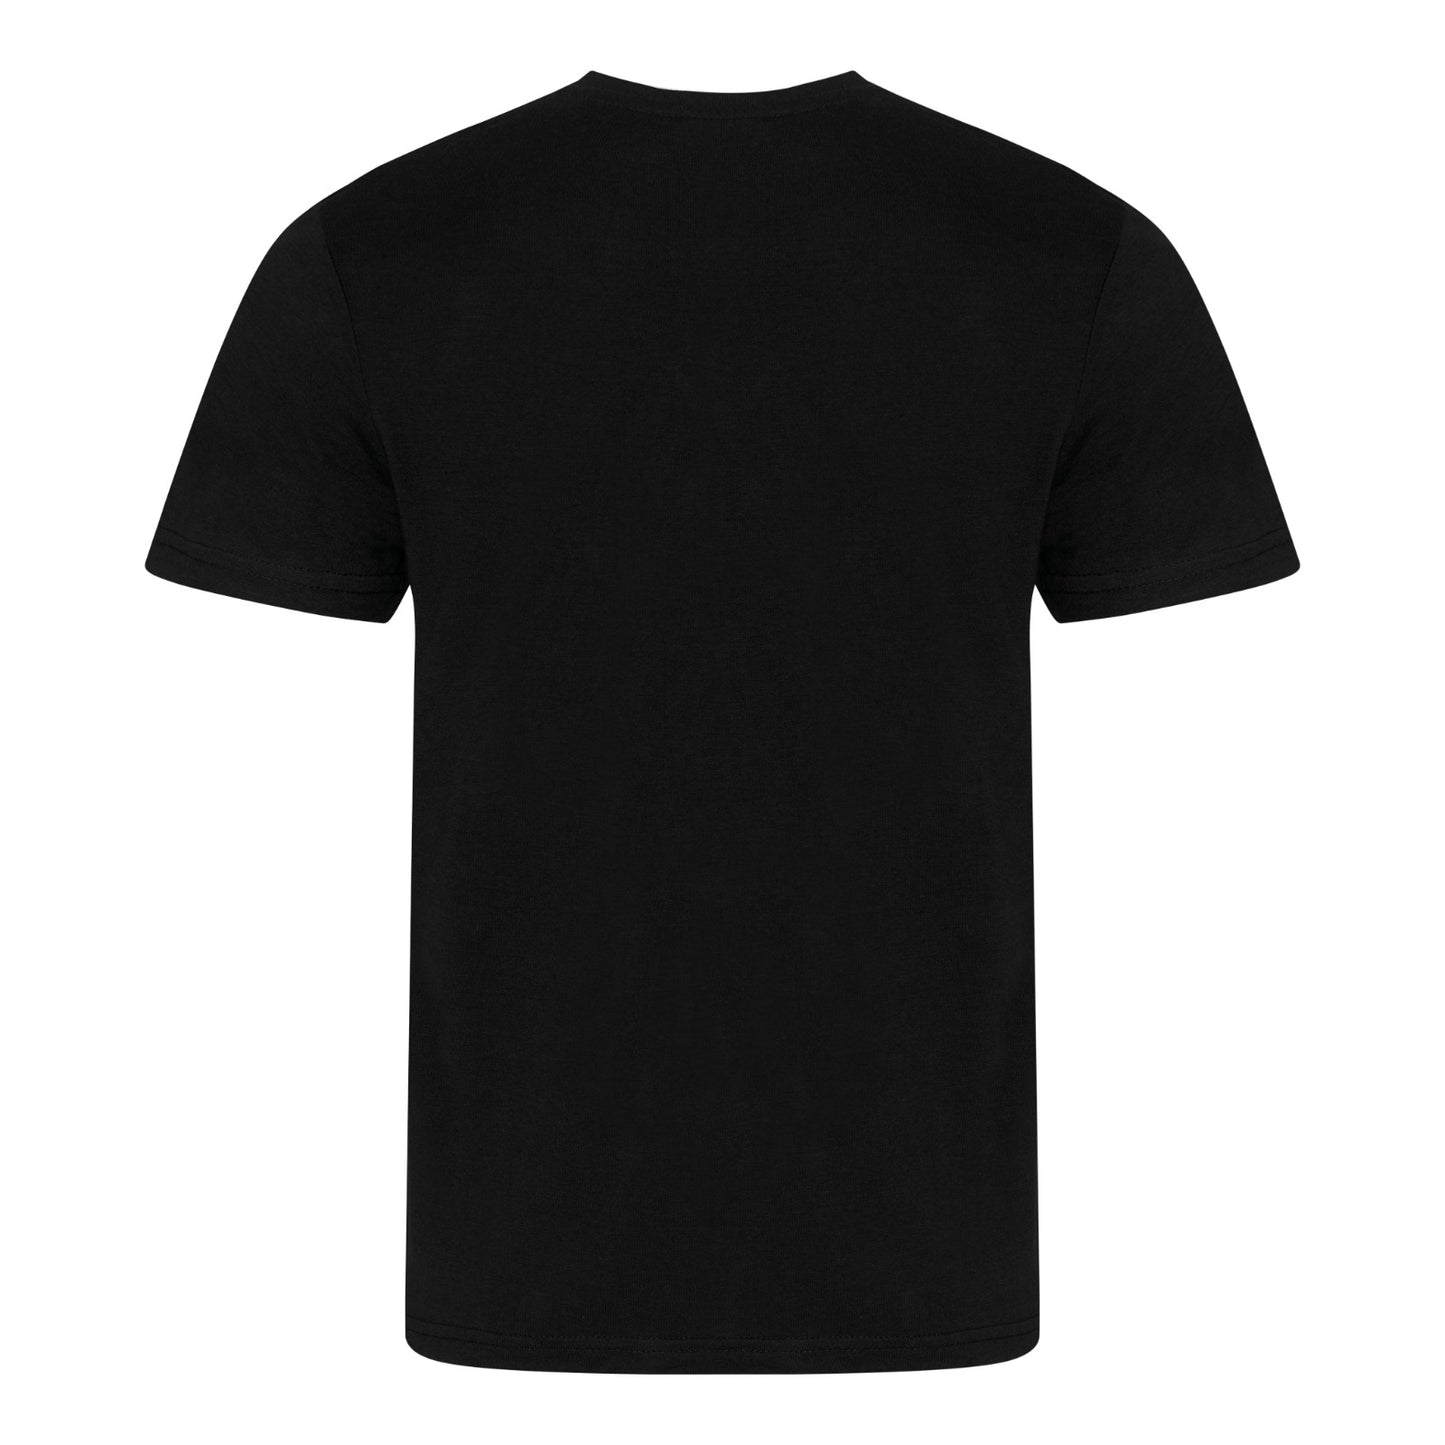 I paused my game to be here black short sleeve T-Shirt